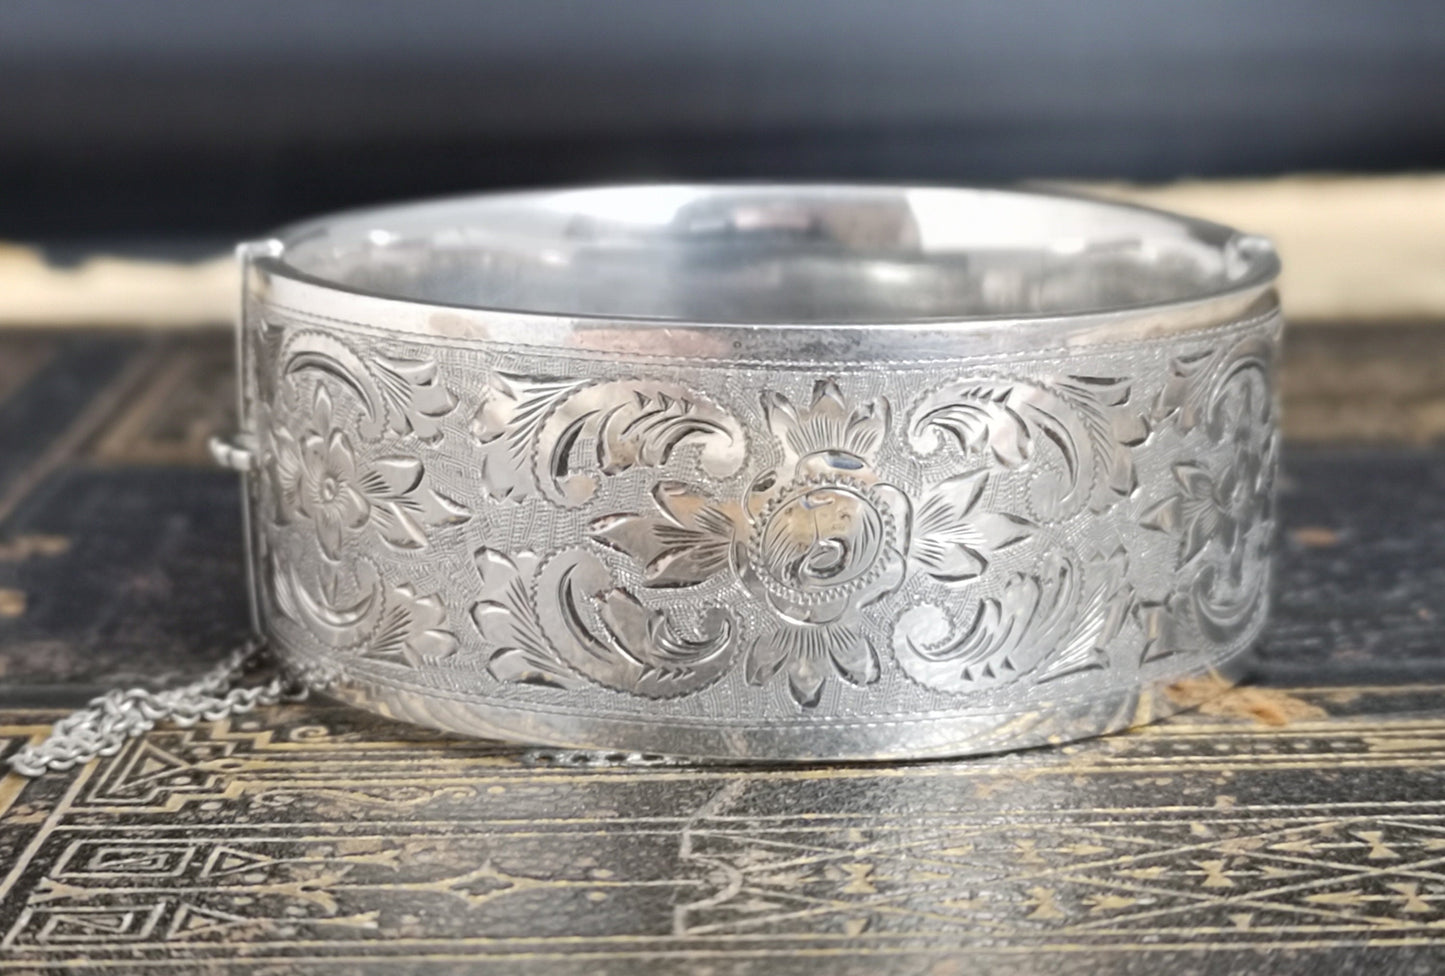 Antique silver cuff bangle, Victorian floral aesthetic